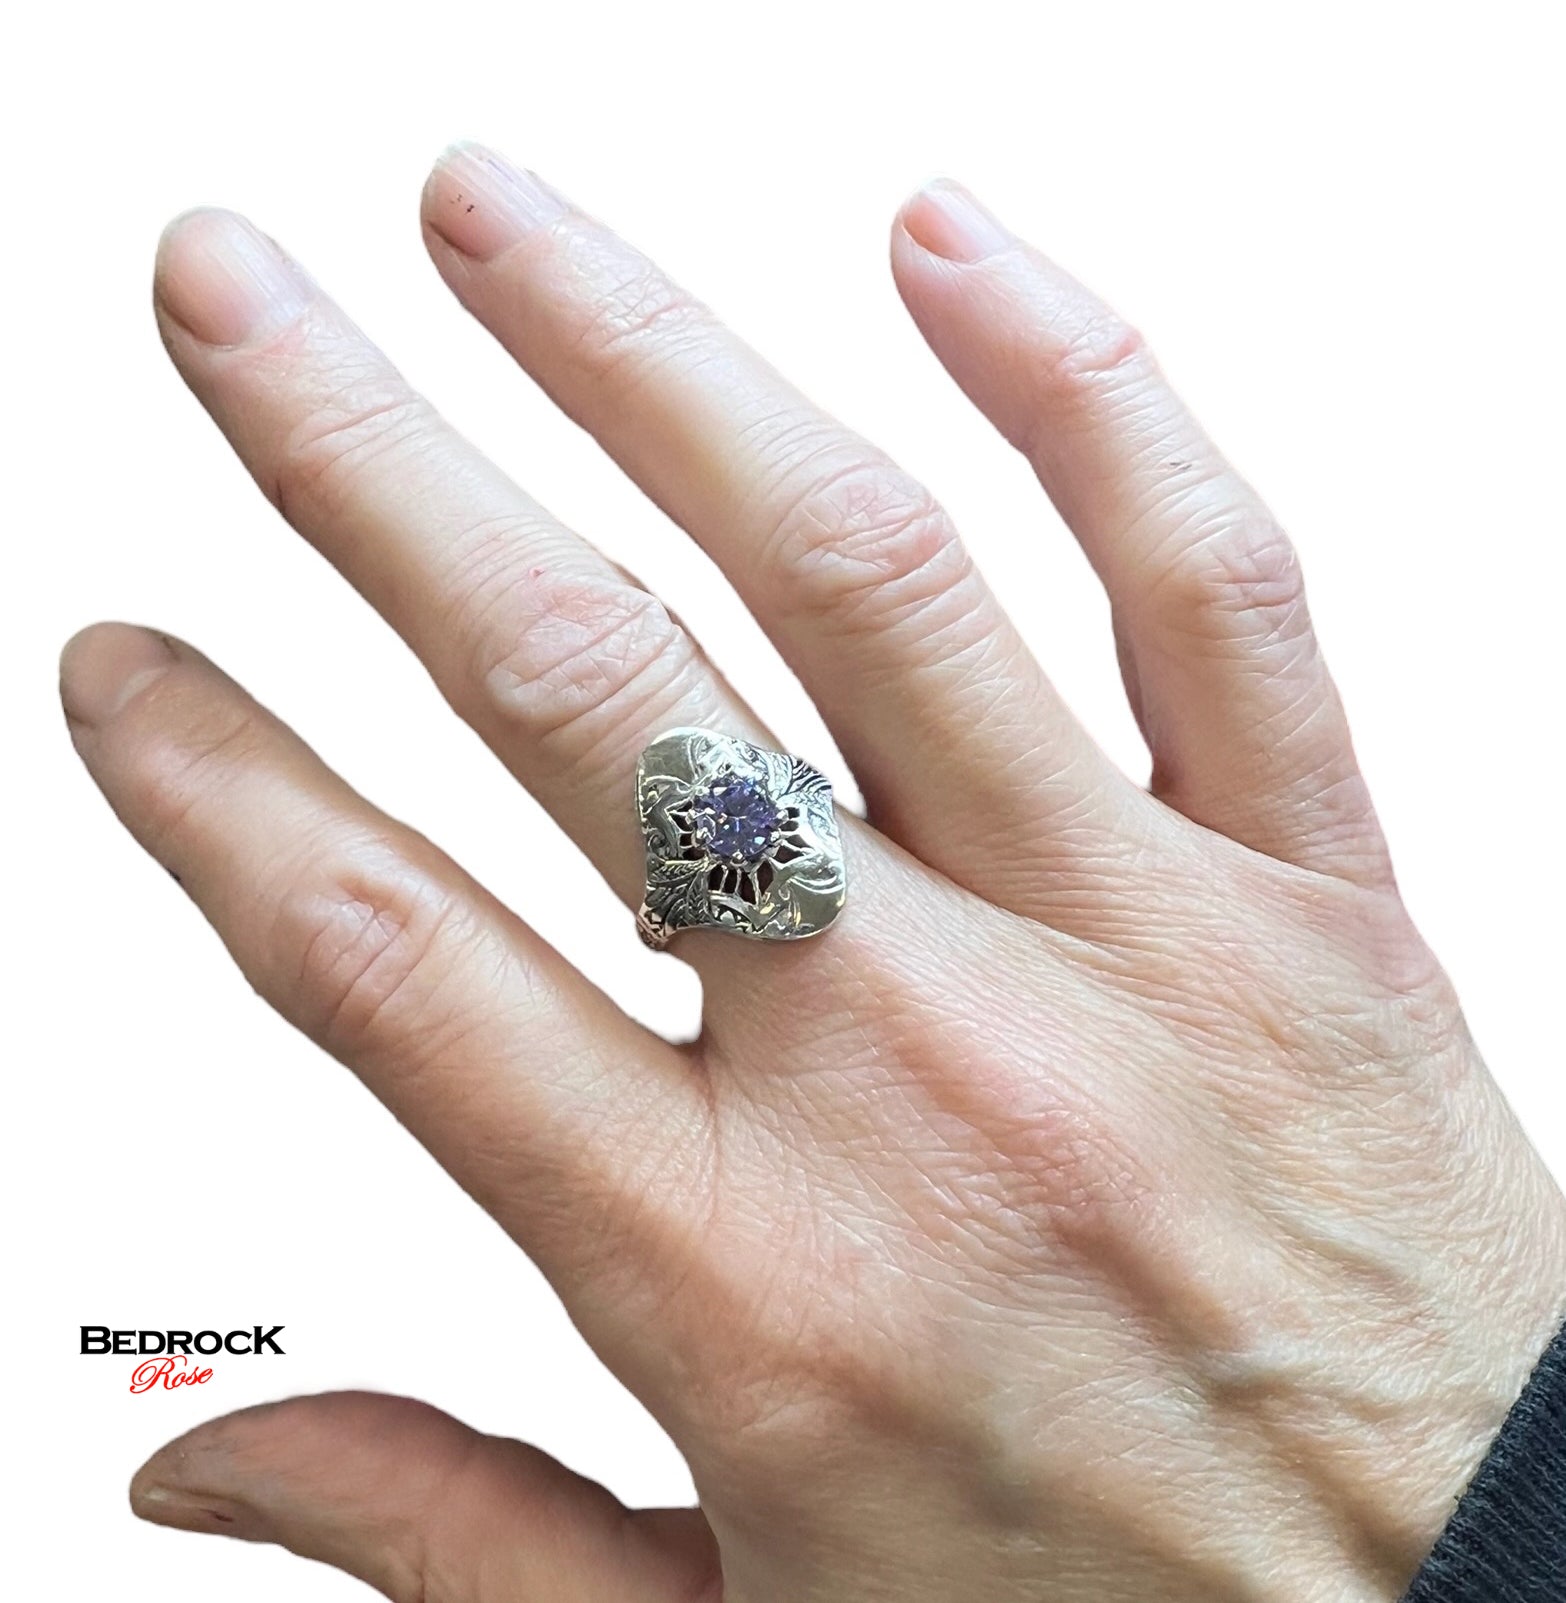 Stunning Edwardian style sterling silver, Lavender focal stone Edwardian ring, Victorian era sterling silver ring